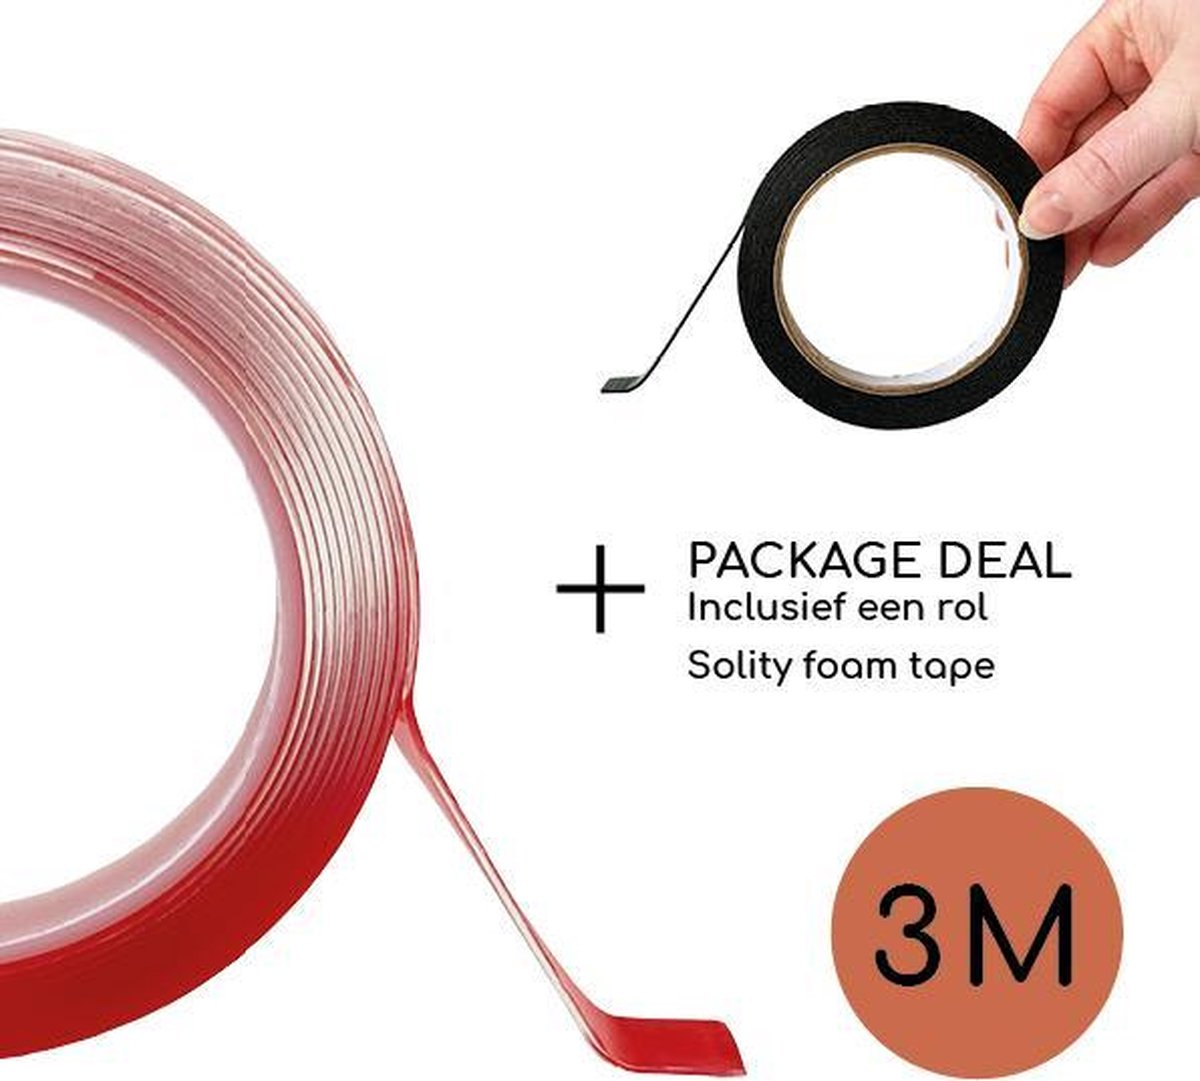 SOLITY® 2x Dubbelzijdige Montagetape - Dubbelzijdig Plakband - Extra Sterk - Inclusief Extra’s - Transparant - 3m x 10mm - Packagedeal - SOLITY